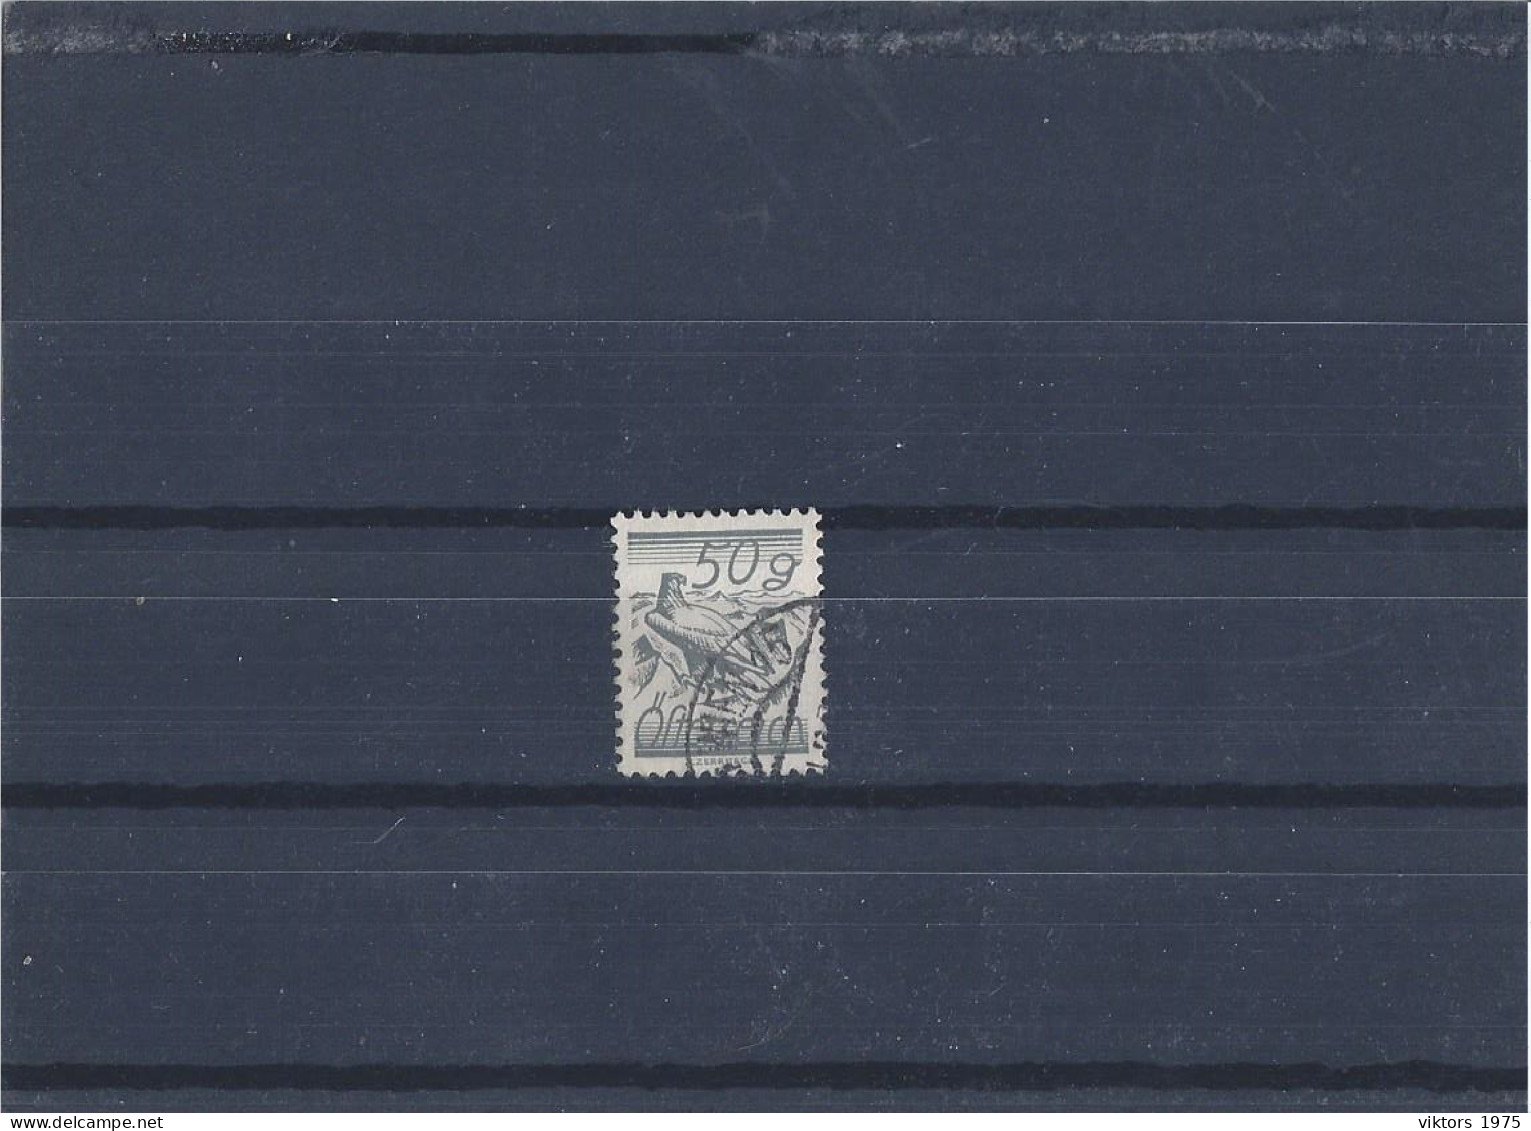 Used Stamp Nr.463 In MICHEL Catalog - Used Stamps